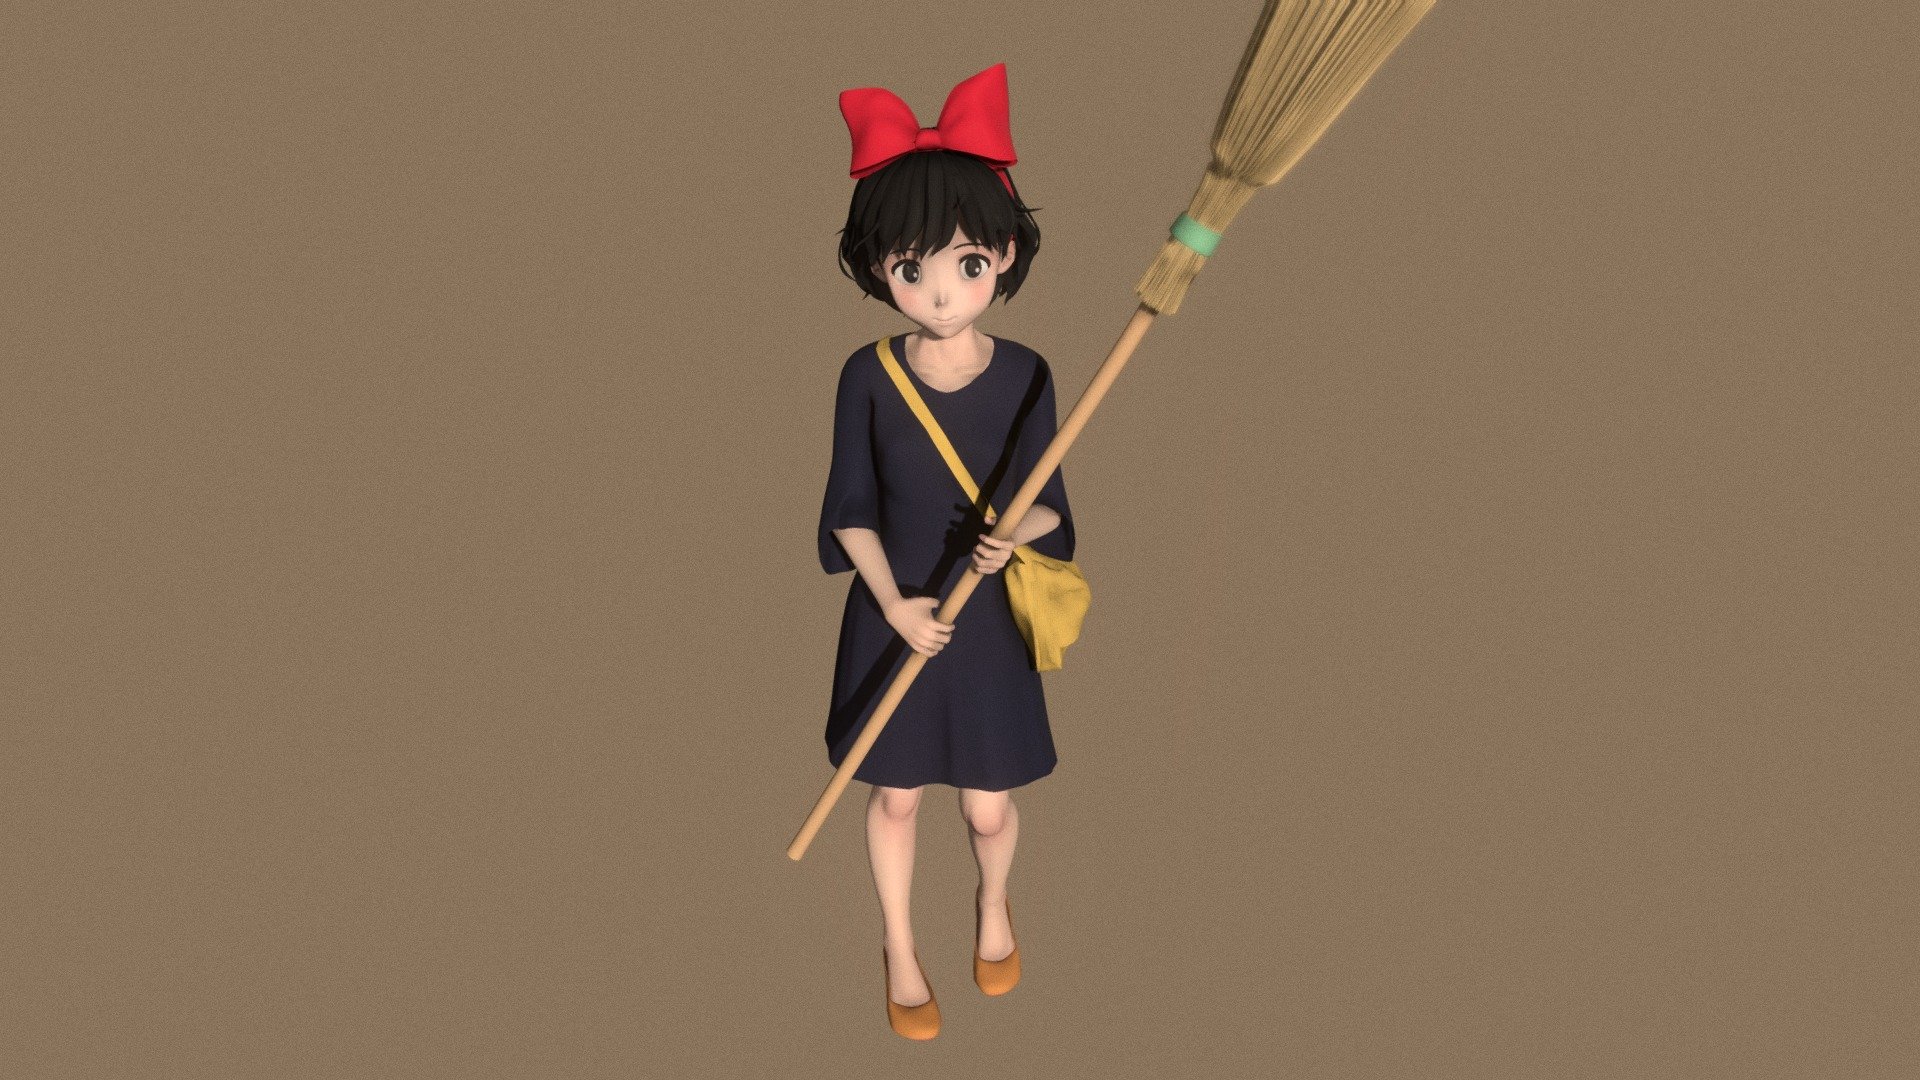 Posed model of anime girl Kiki (Kiki's Delivery Service).

This product include .FBX (ver. 7200) and .MAX (ver. 2010) files.

Rigged version: https://sketchfab.com/3d-models/t-pose-rigged-model-of-kiki-1aef735955f647c986d33a71c443fe93

I support convert this 3D model to various file formats: 3DS; AI; ASE; DAE; DWF; DWG; DXF; FLT; HTR; IGS; M3G; MQO; OBJ; SAT; STL; W3D; WRL; X.

You can buy all of my models in one pack to save cost: https://sketchfab.com/3d-models/all-of-my-anime-girls-c5a56156994e4193b9e8fa21a3b8360b

And I can make commission models.

If you have any questions, please leave a comment or contact me via my email 3d.eden.project@gmail.com 3d model